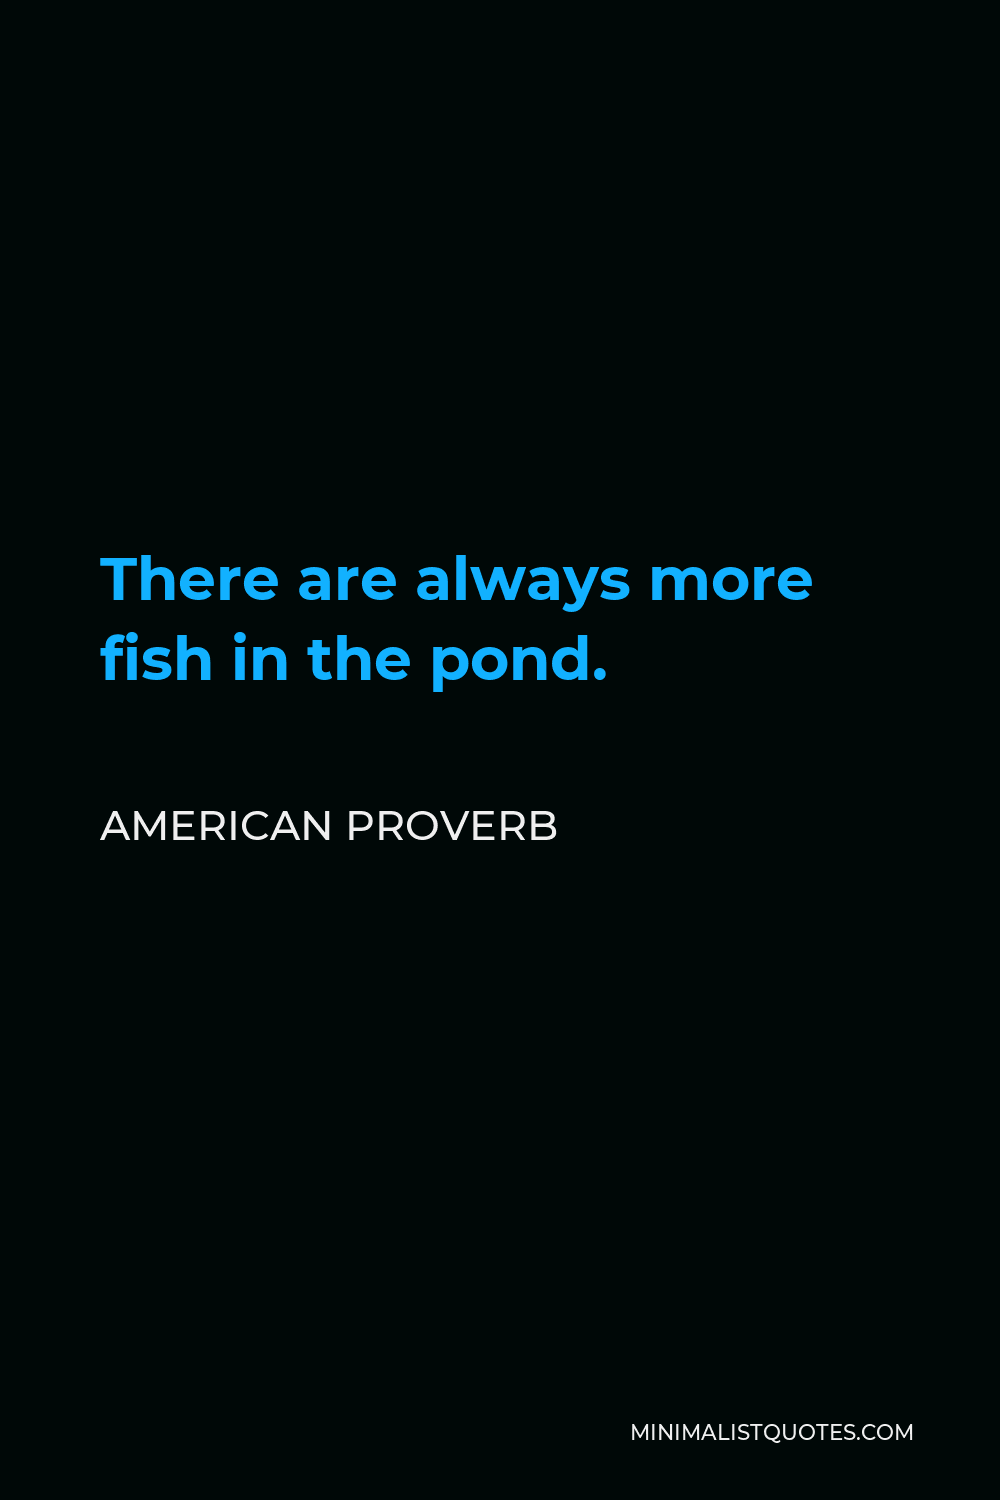 American Proverb Quote - There are always more fish in the pond.